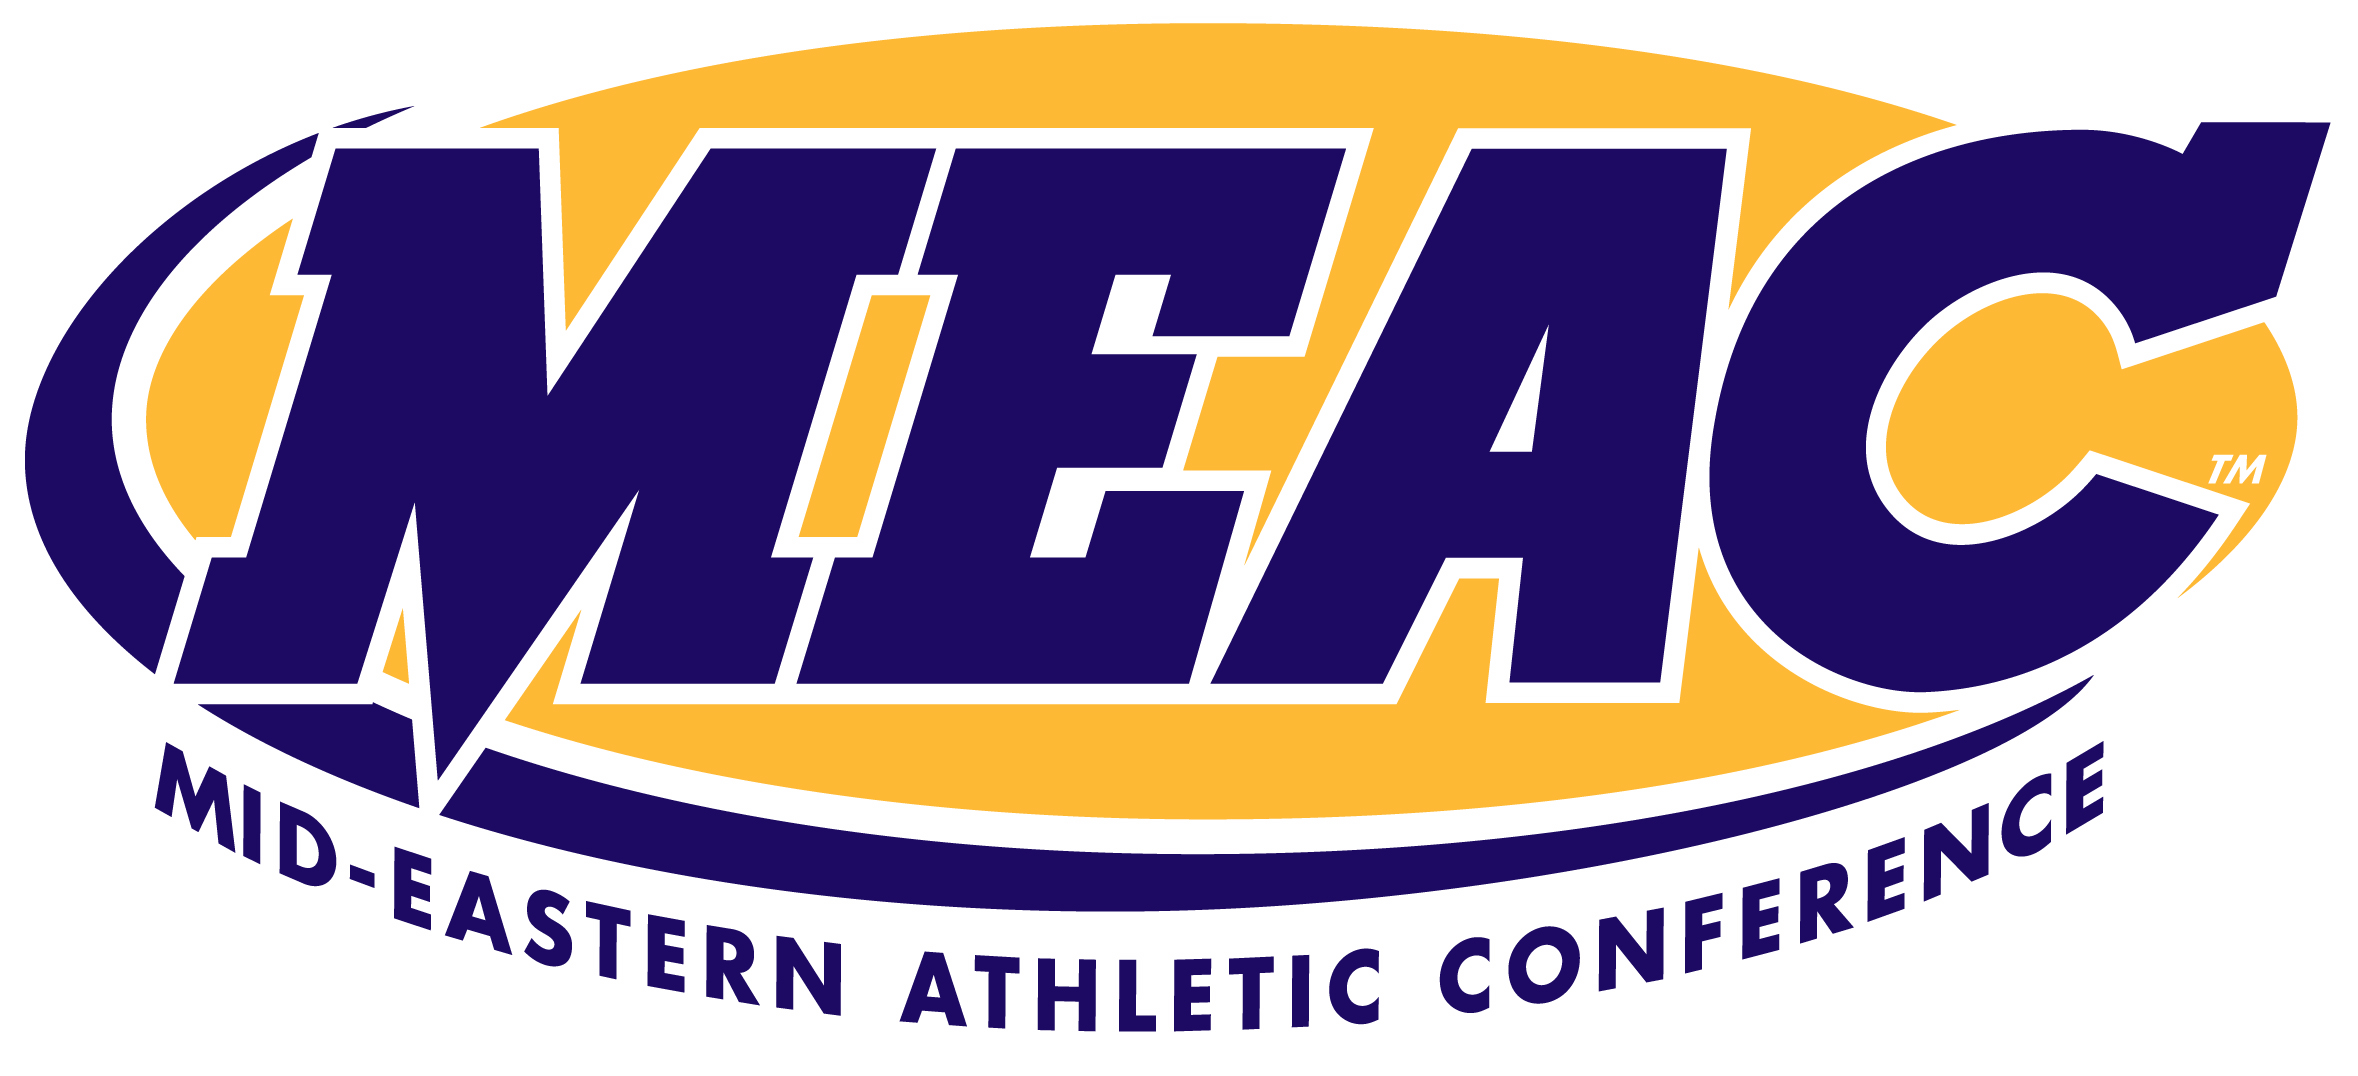 Mid-Eastern Athletic Conference (MEAC)